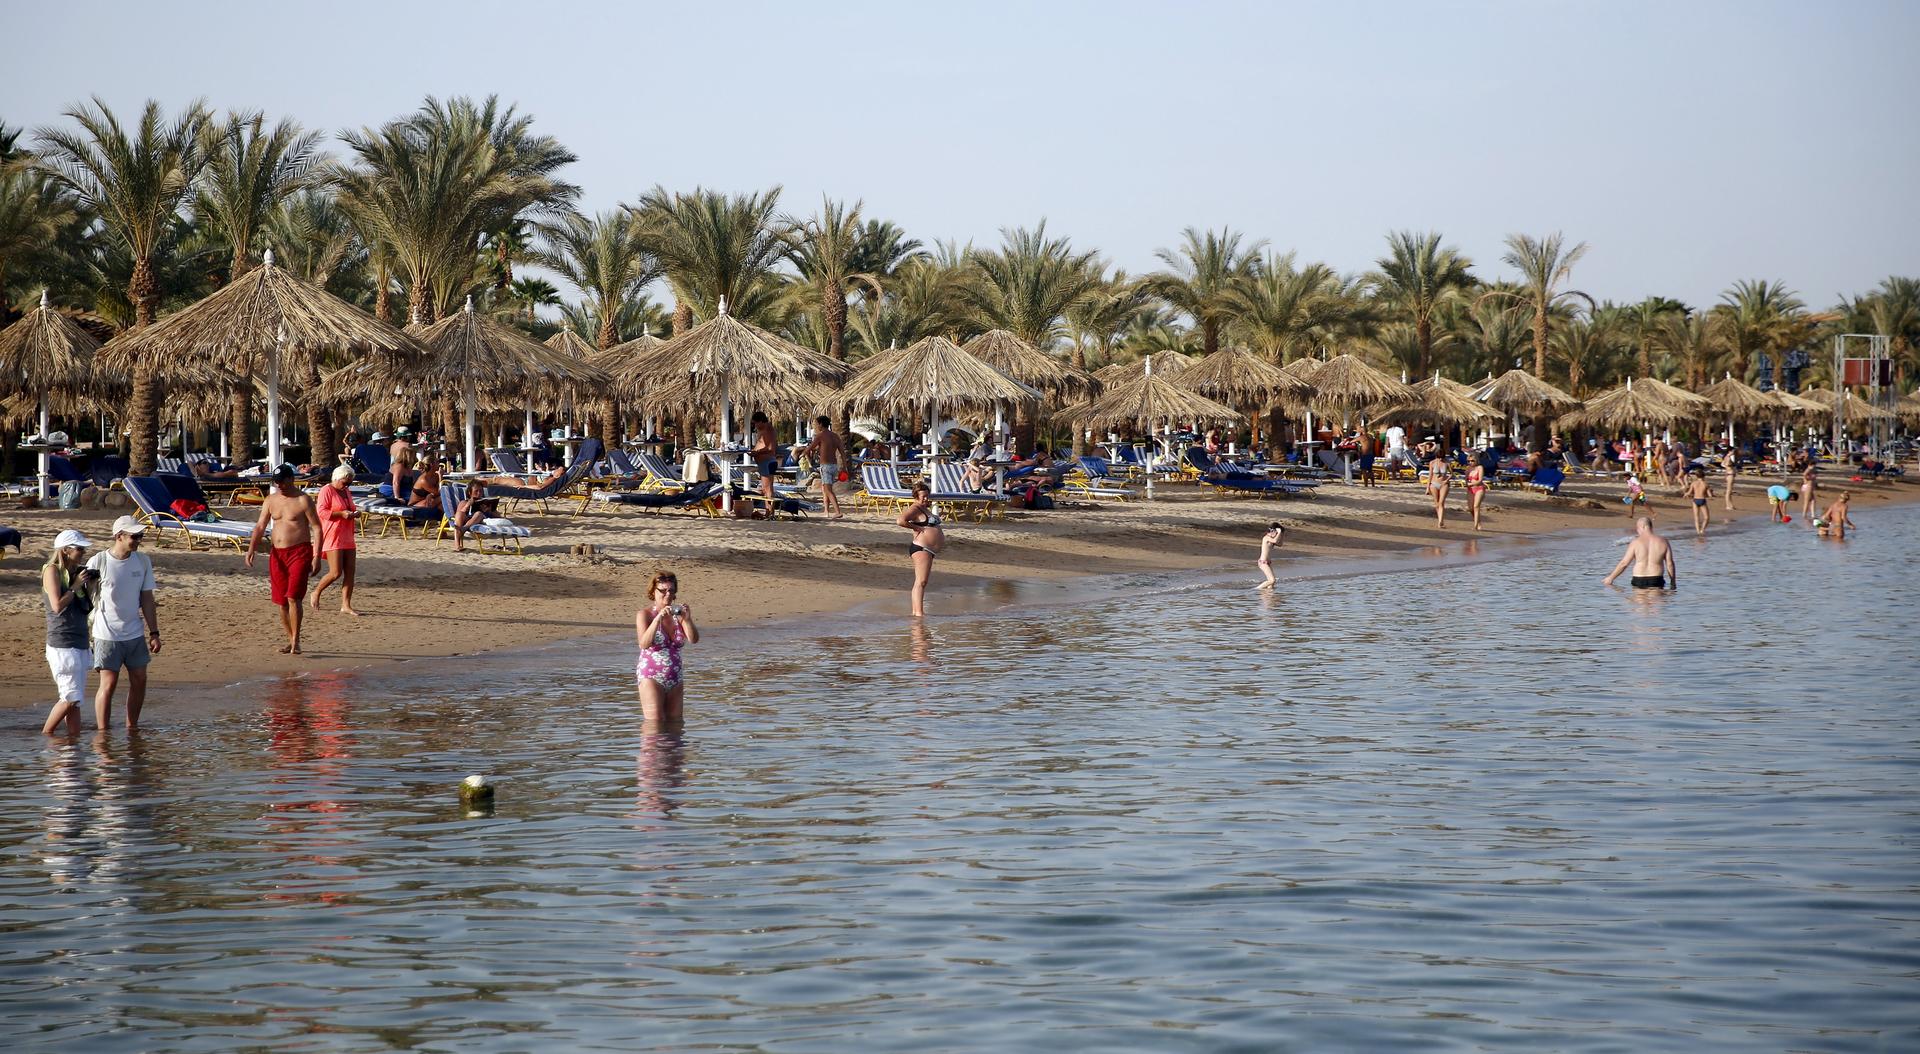 Tourists enjoy the beach at the Red Sea resort of Sharm el-Sheikh, Egypt